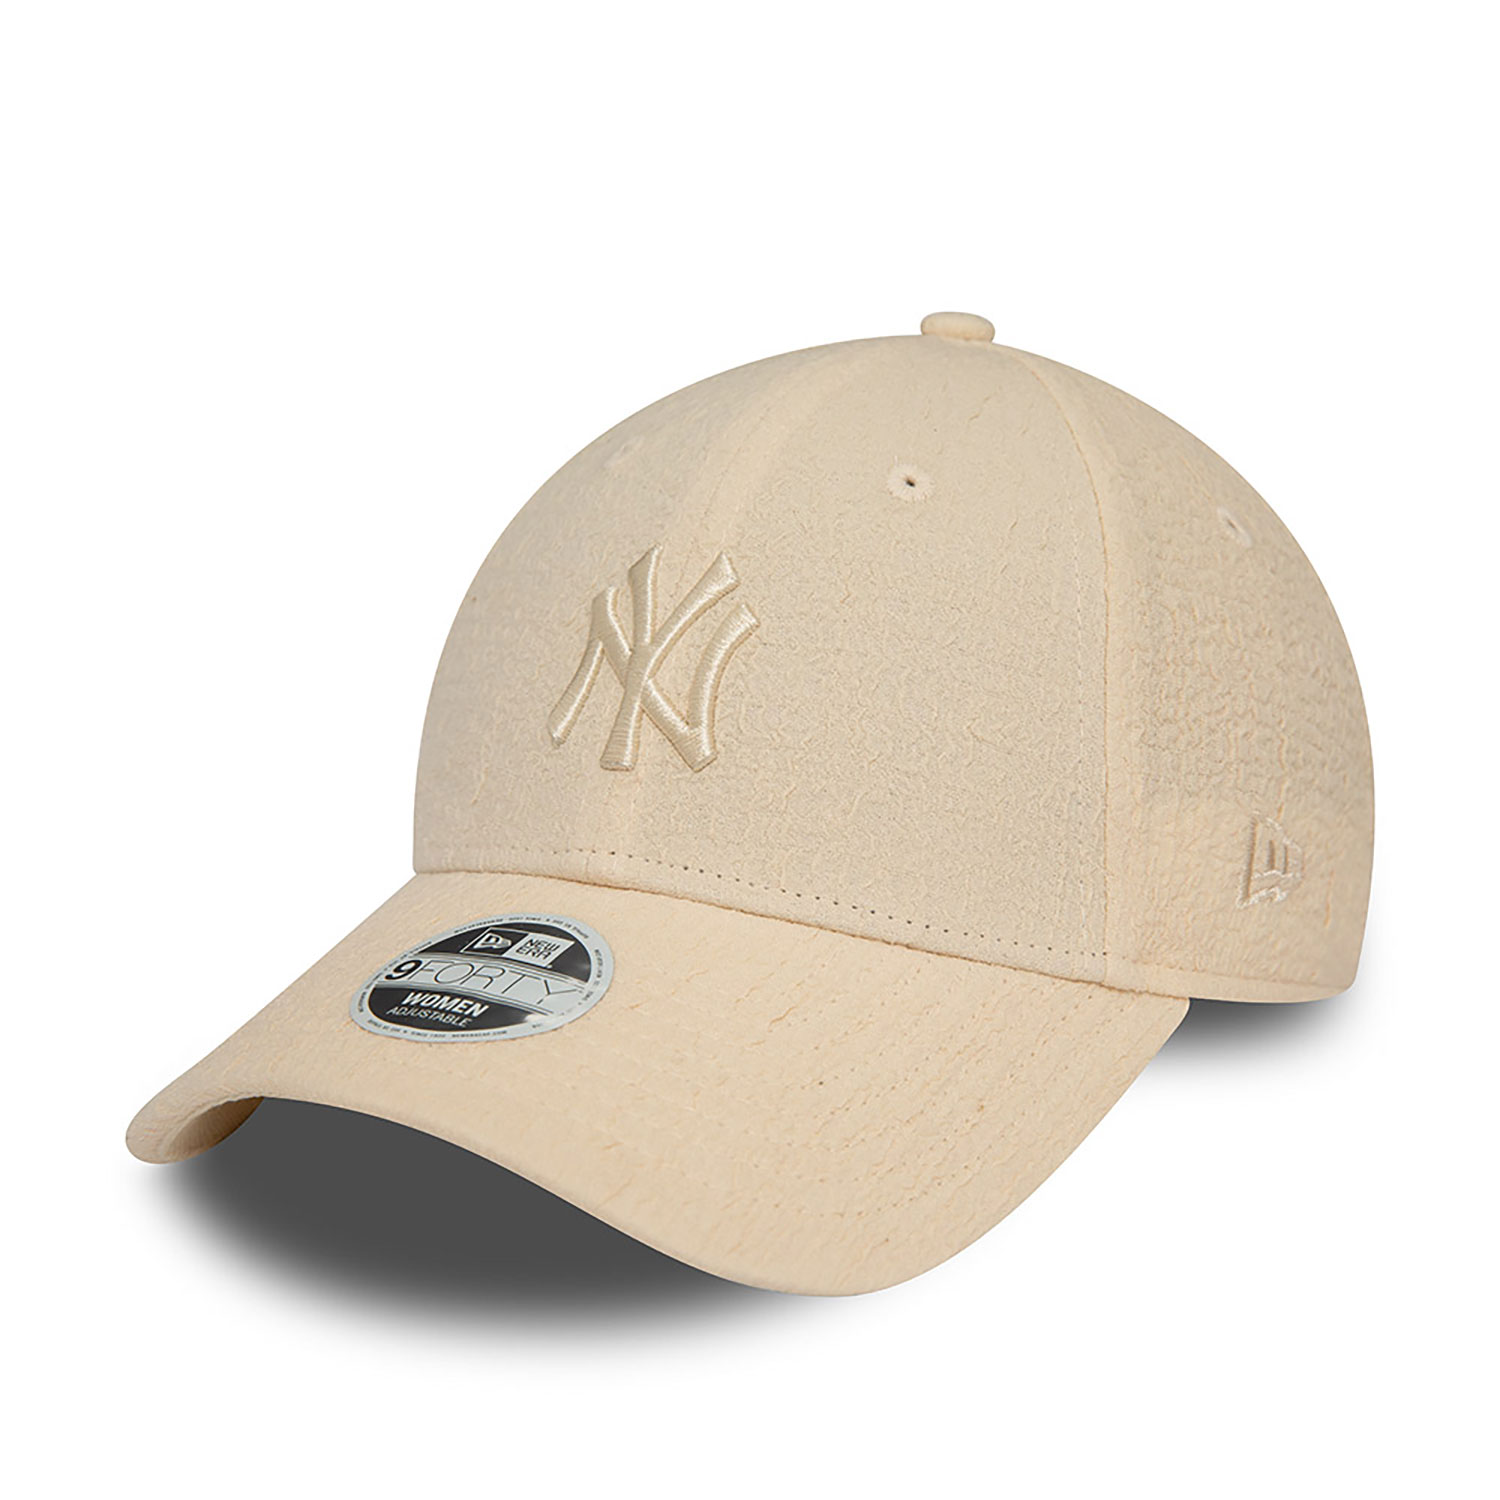 New York Yankees Womens Bubble Stitch Stone 9FORTY Adjustable Cap